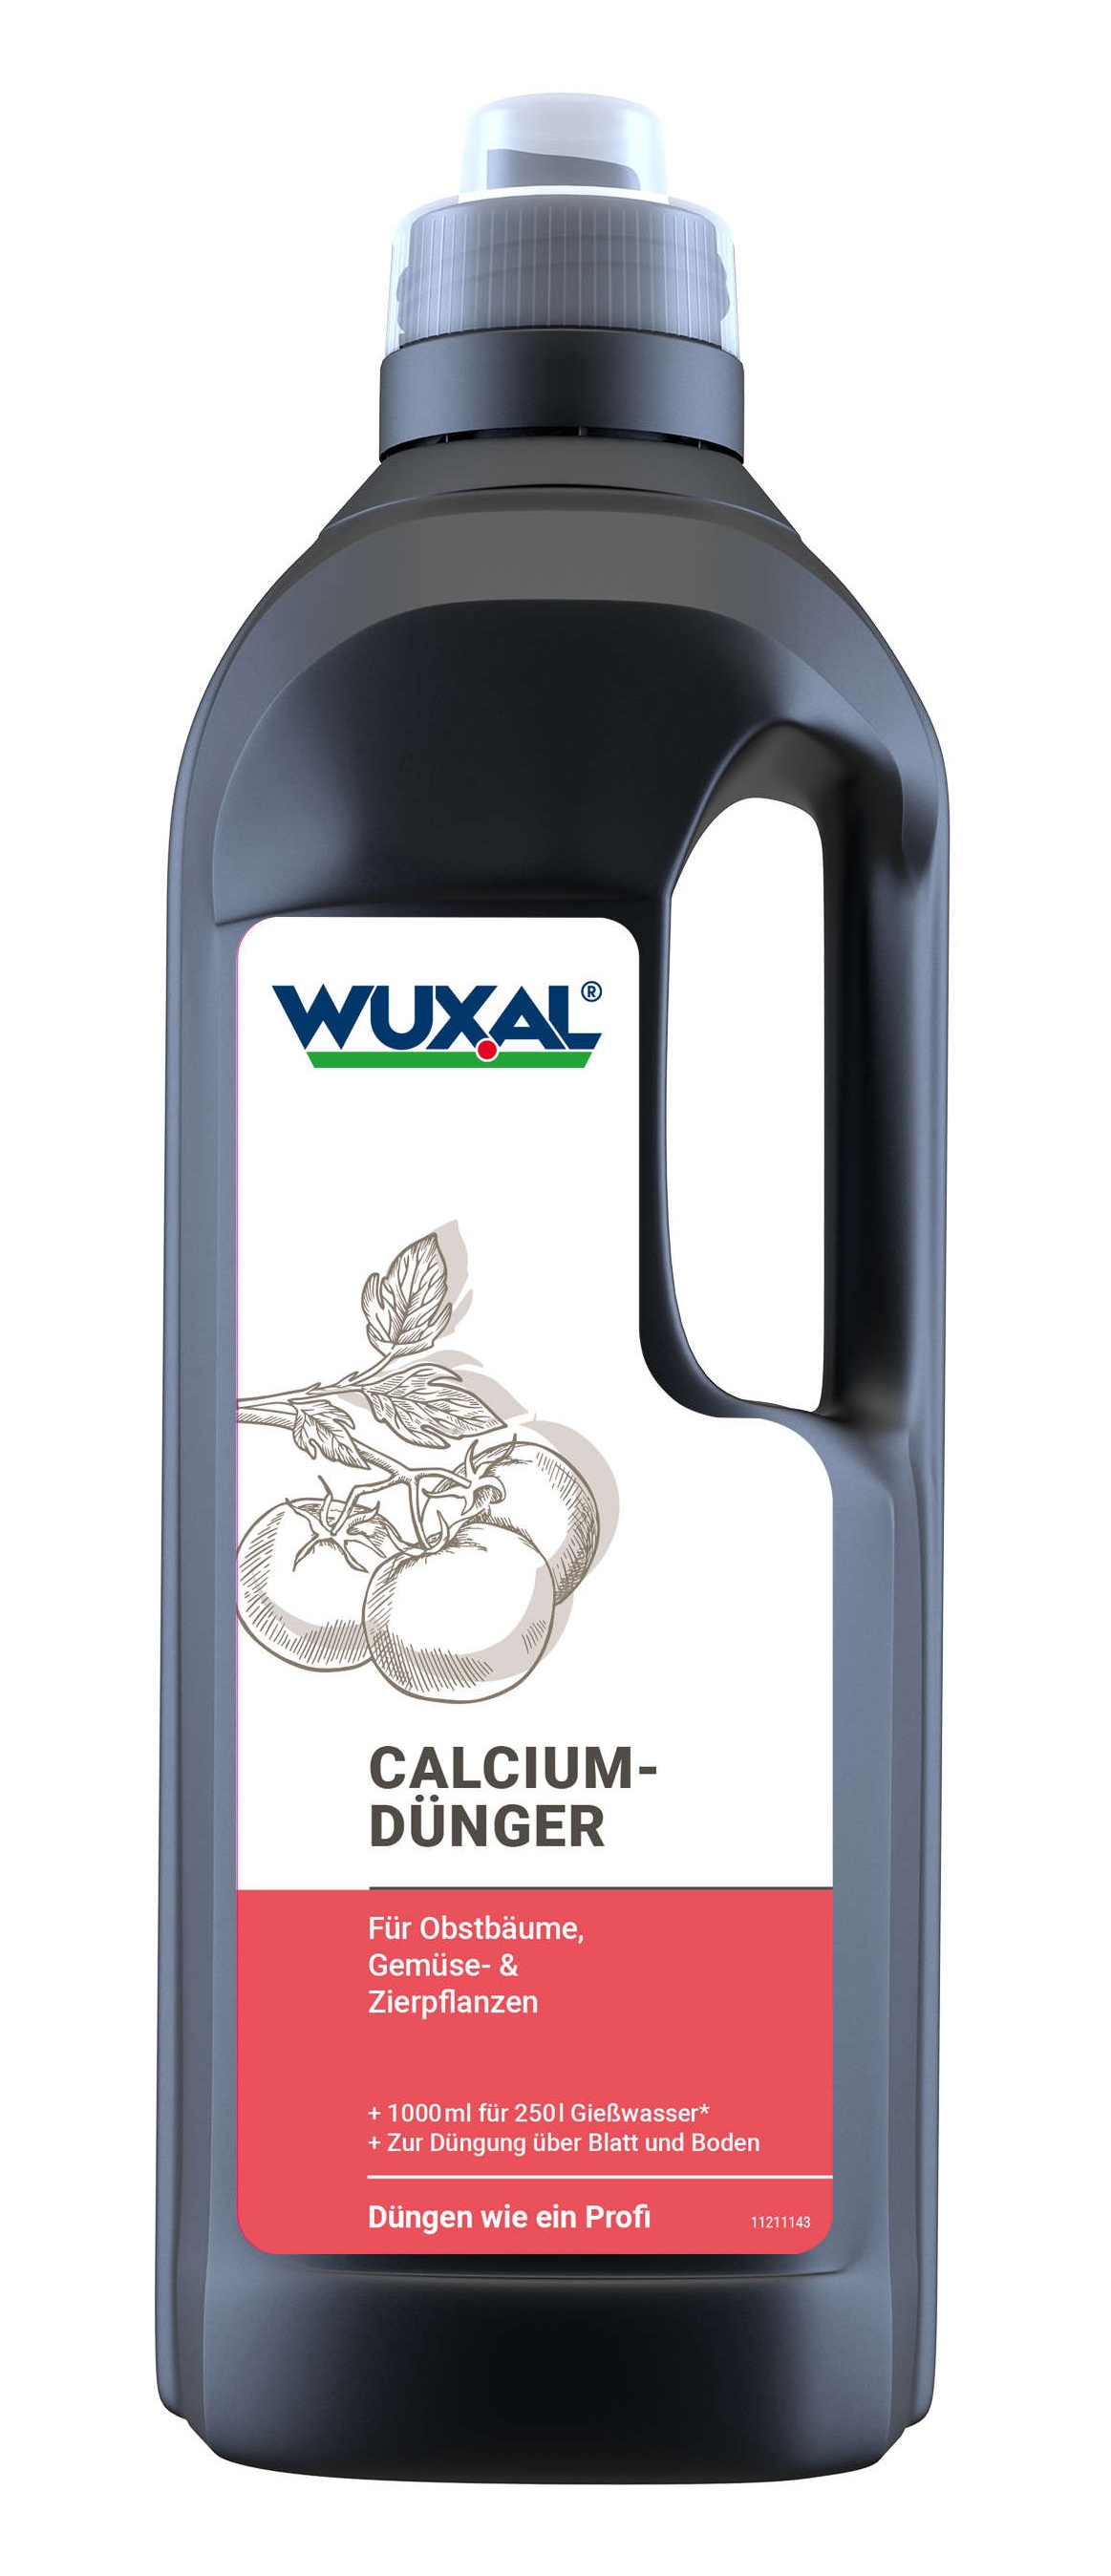 wuxal calciumdnger